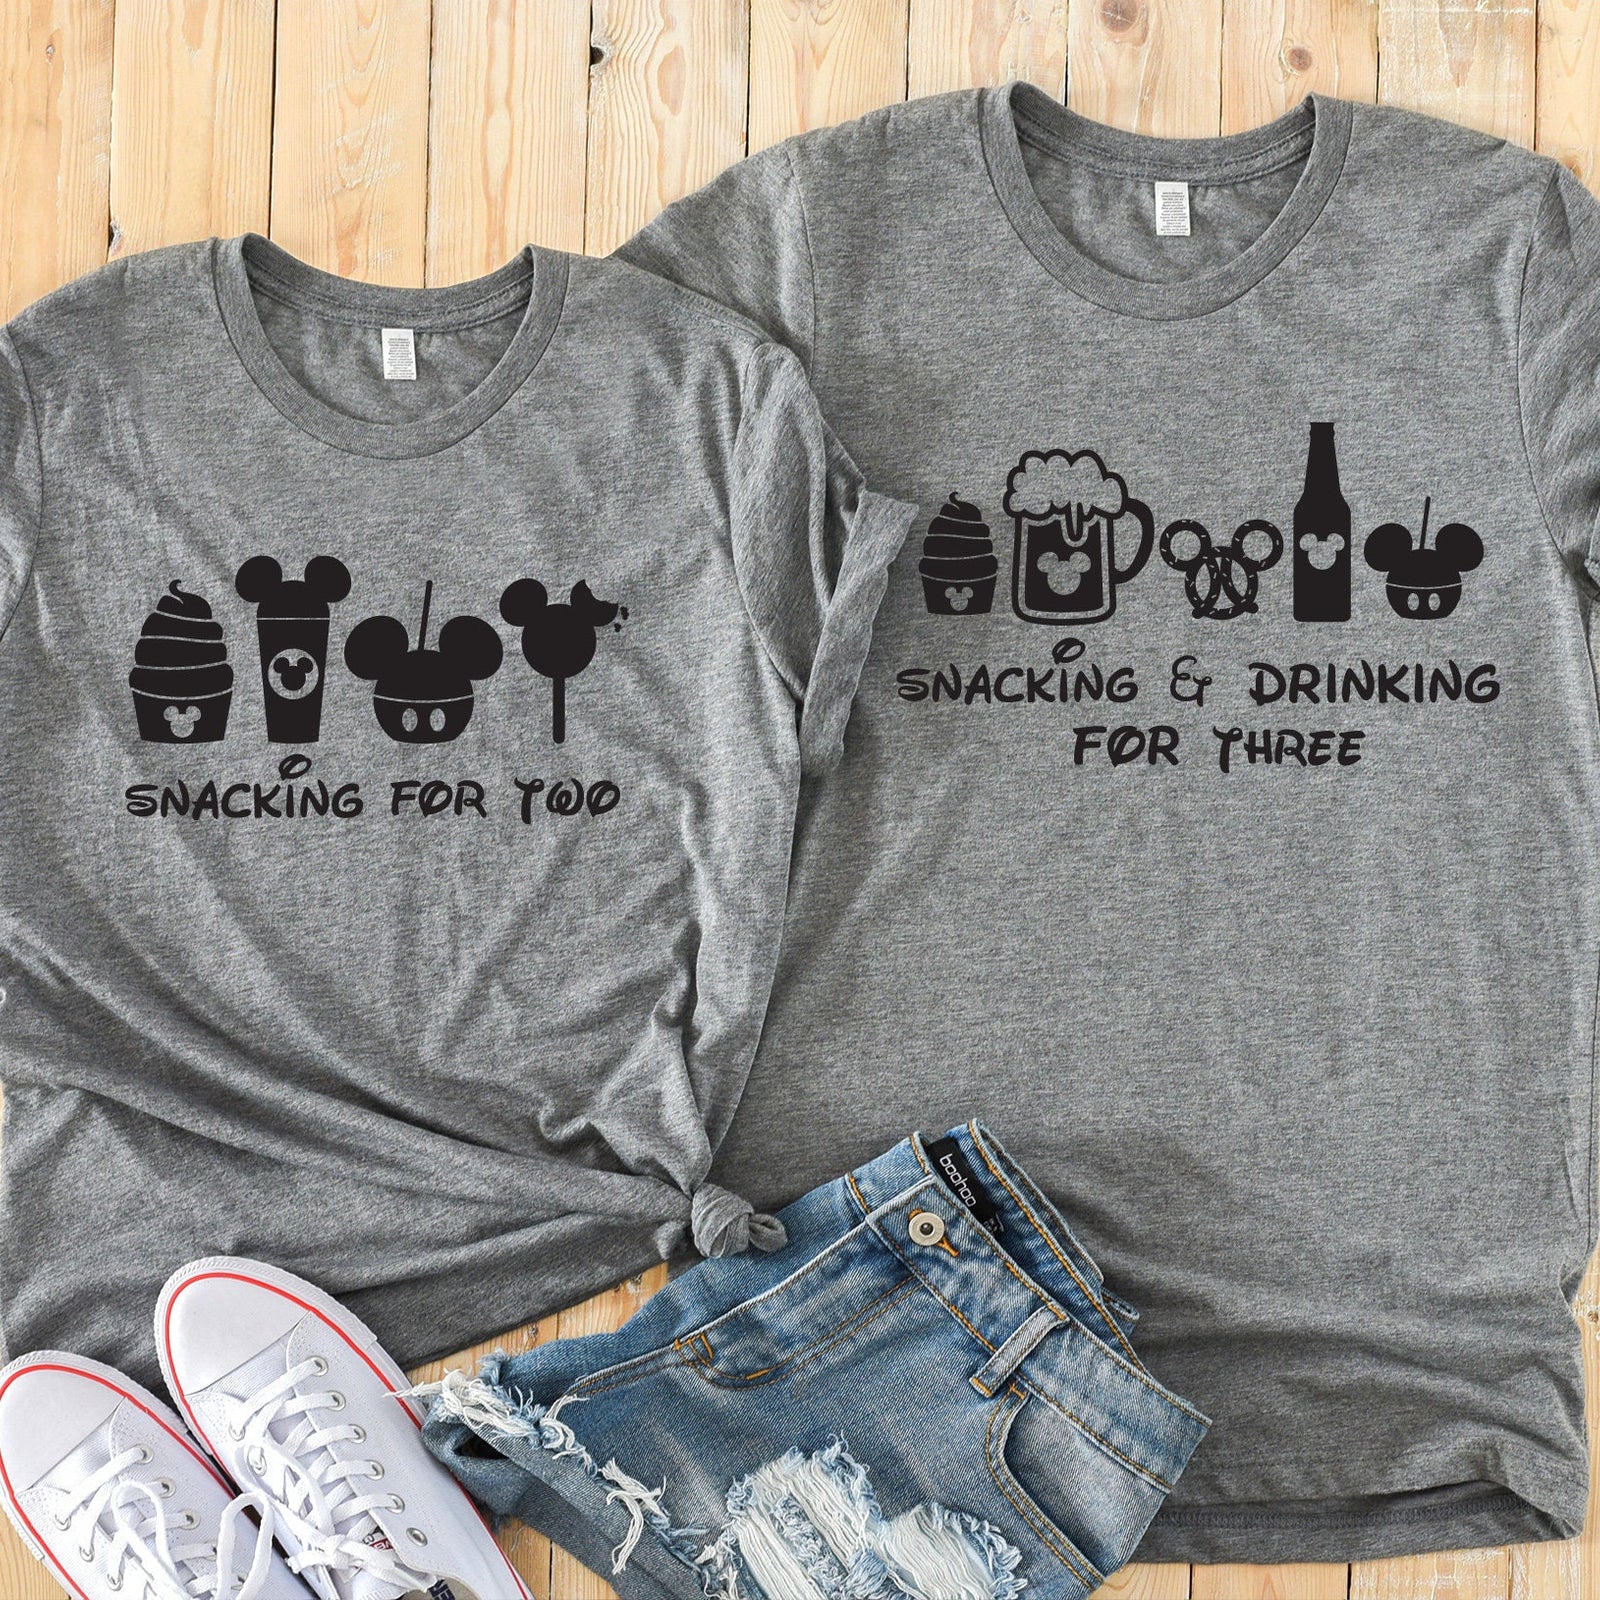 Snacking for Two - Drinking for Three - Funny Disney Couples Shirt - Matching Disney Shirts - Snack Goals - Pregnant